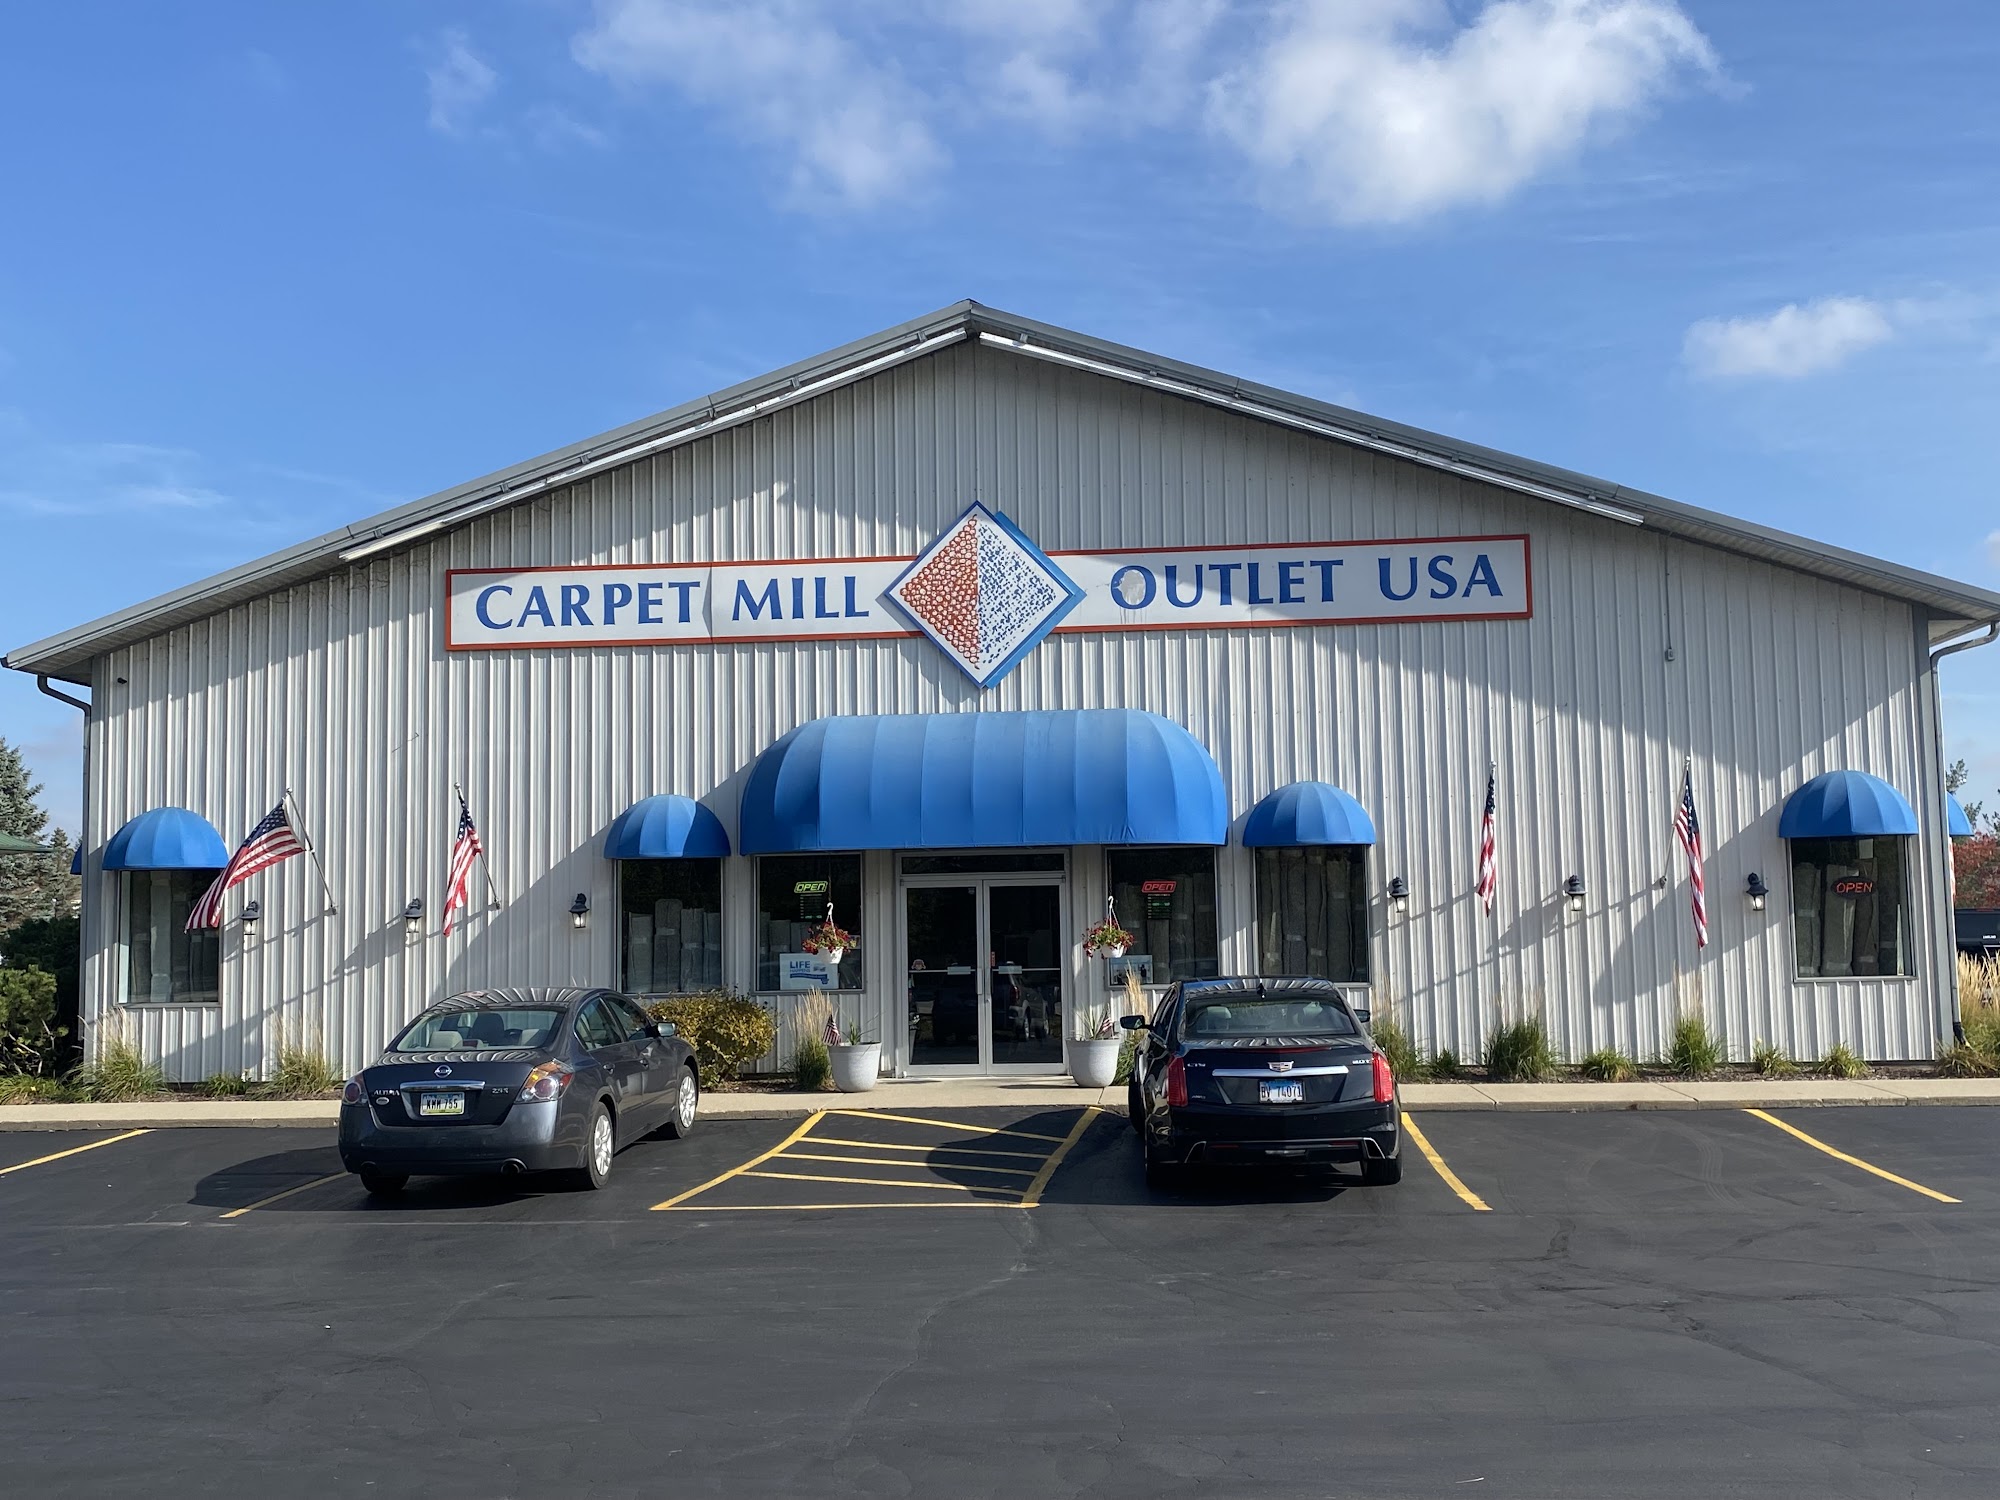 Carpet Mill Outlet USA